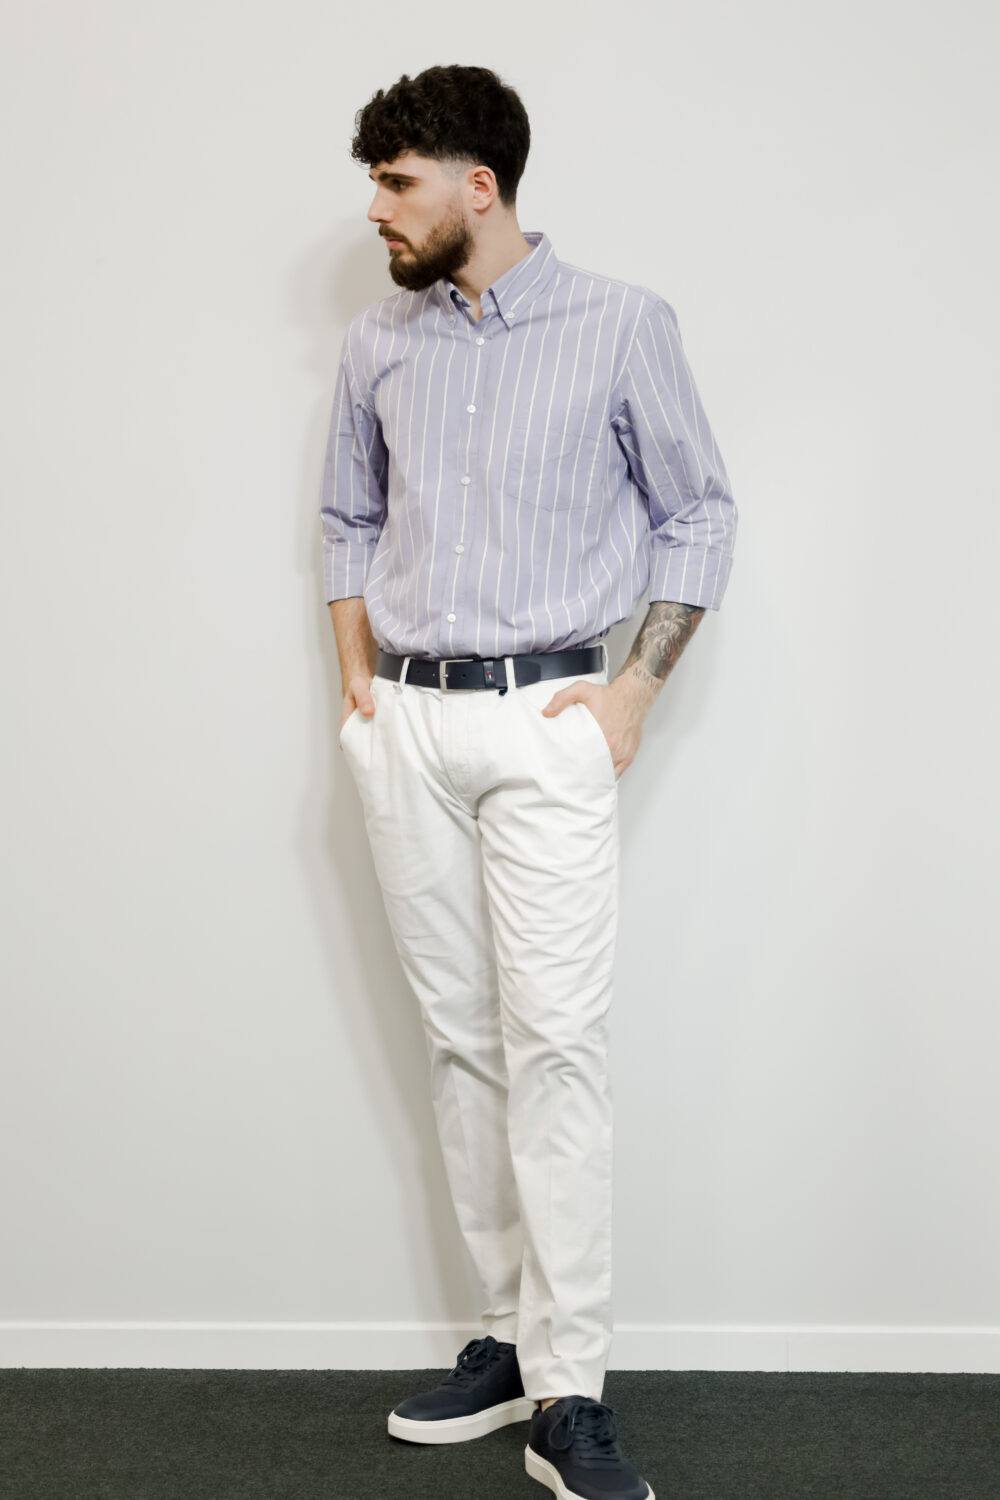 OUTFIT UOMO LOOSE FIT CASUAL #9378 - Foto 4